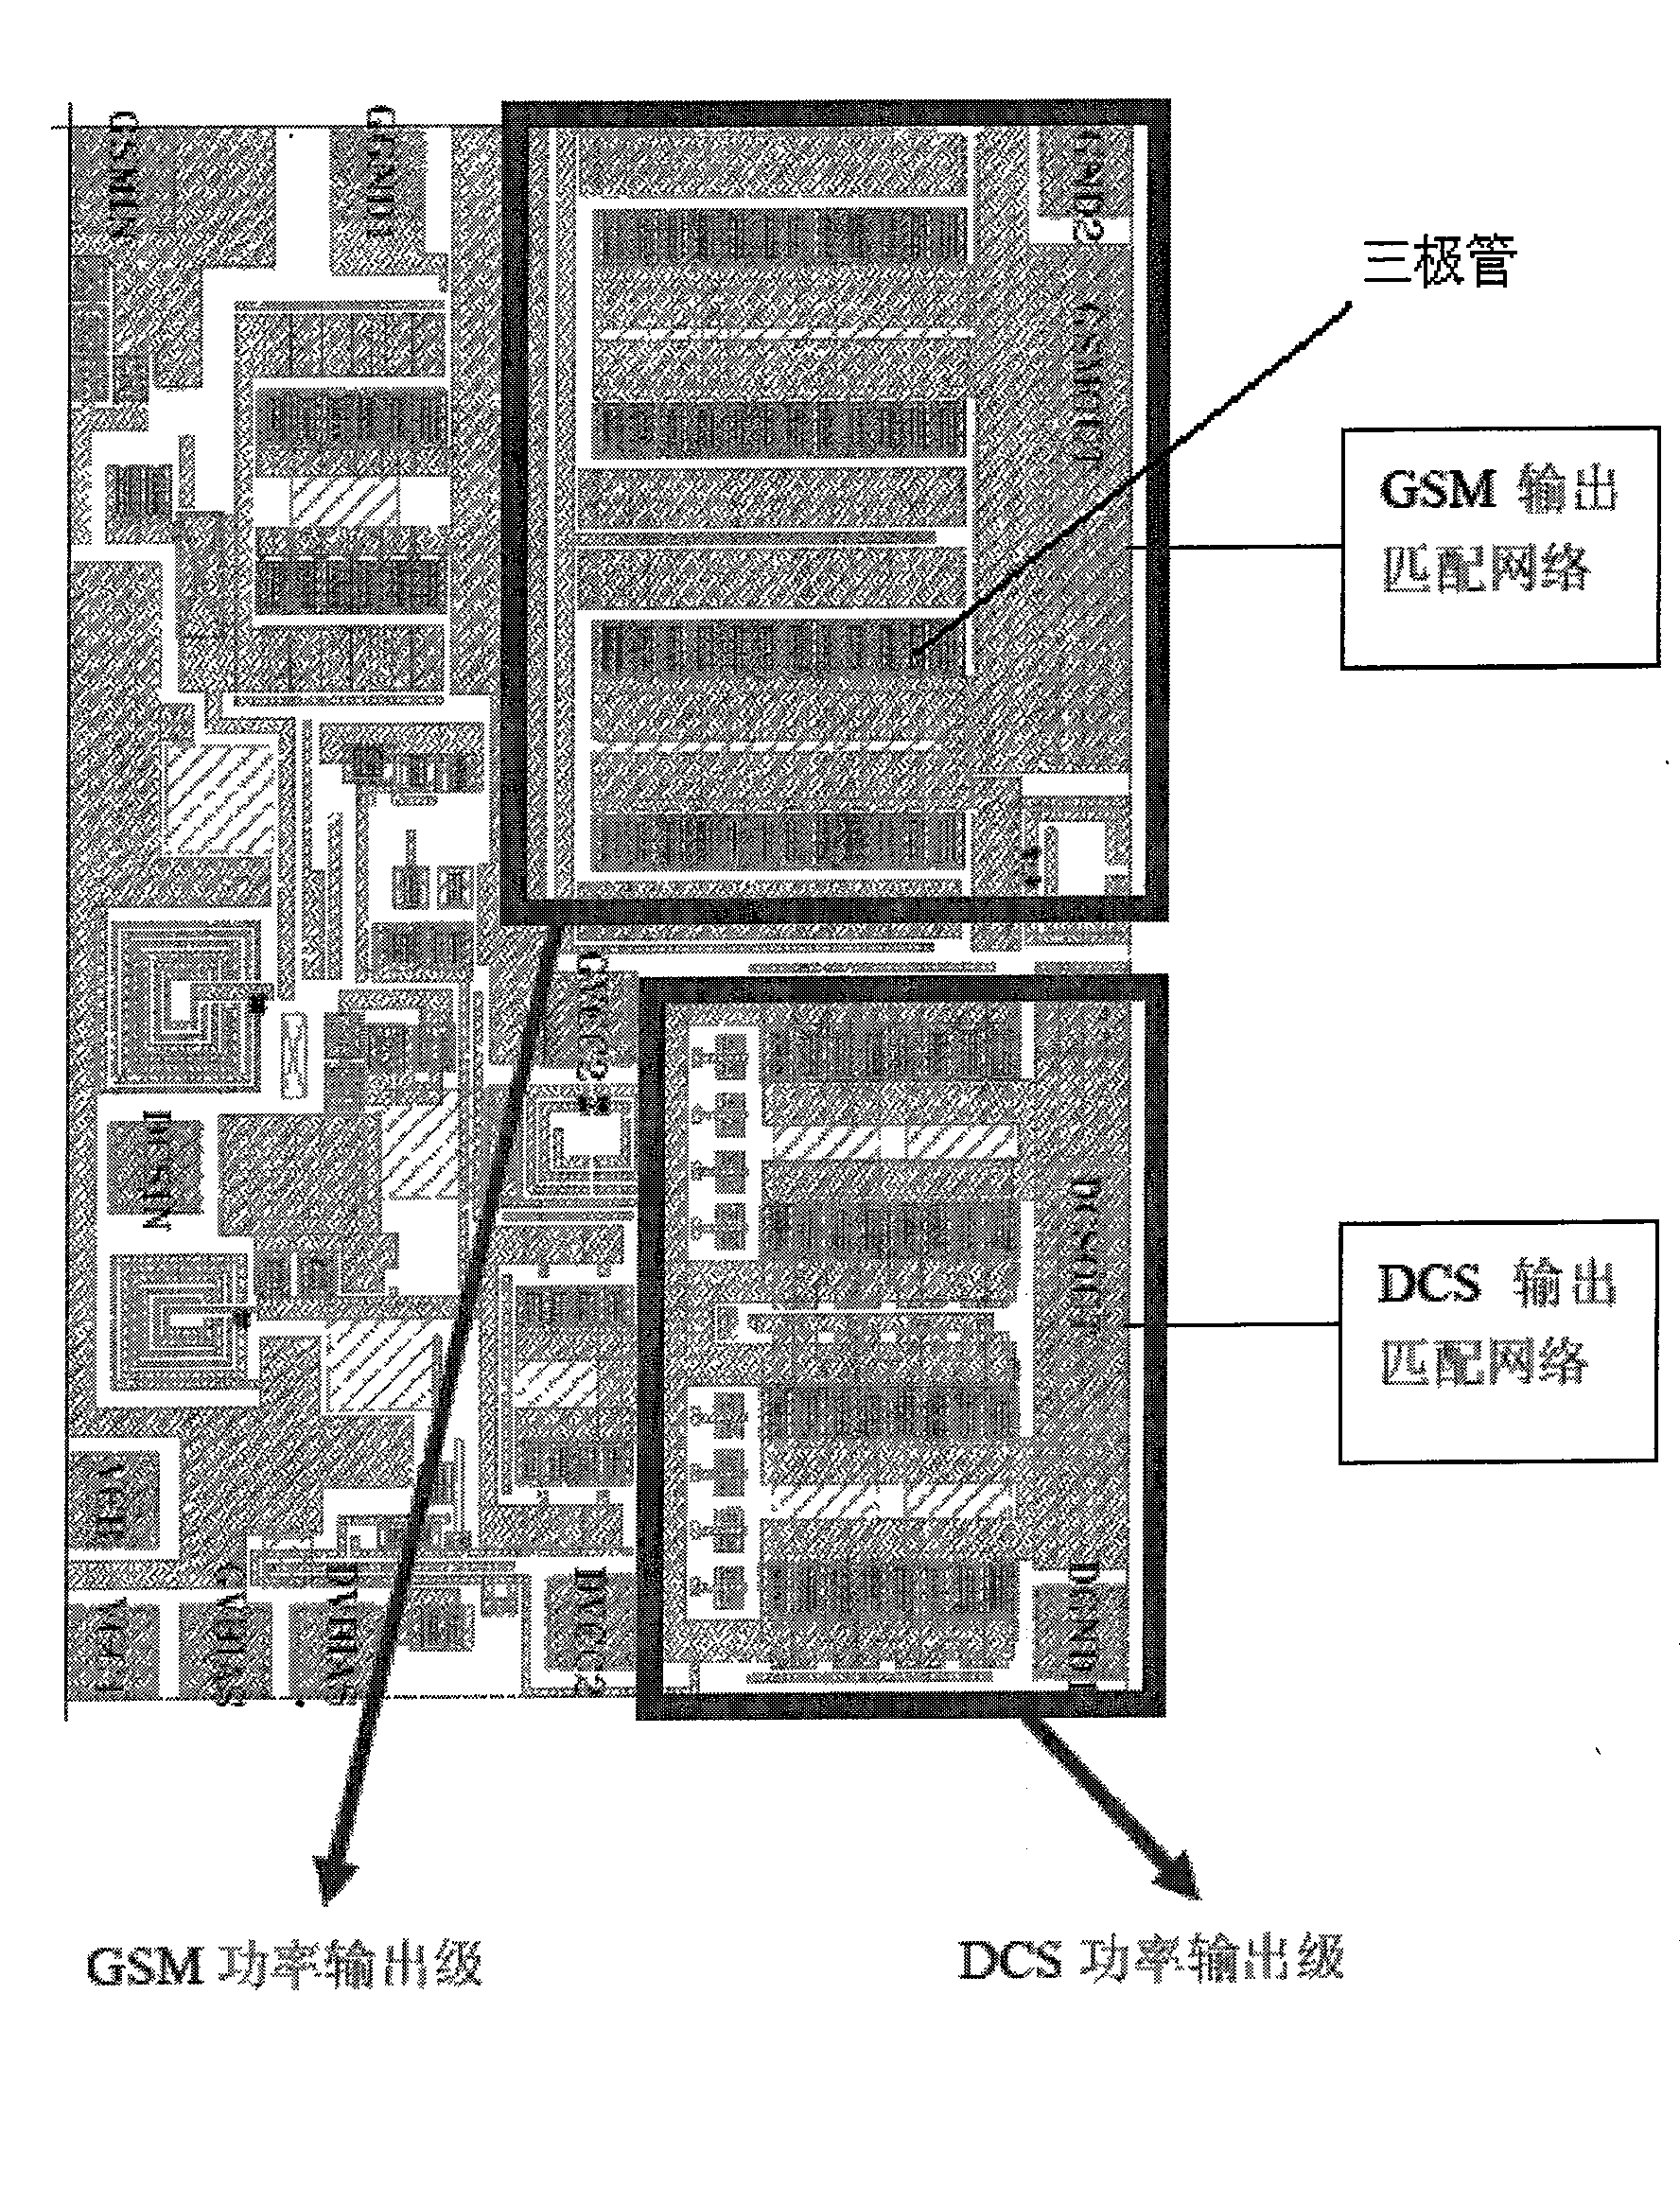 Chip of double-frequency radio-frequency power amplifier circuit